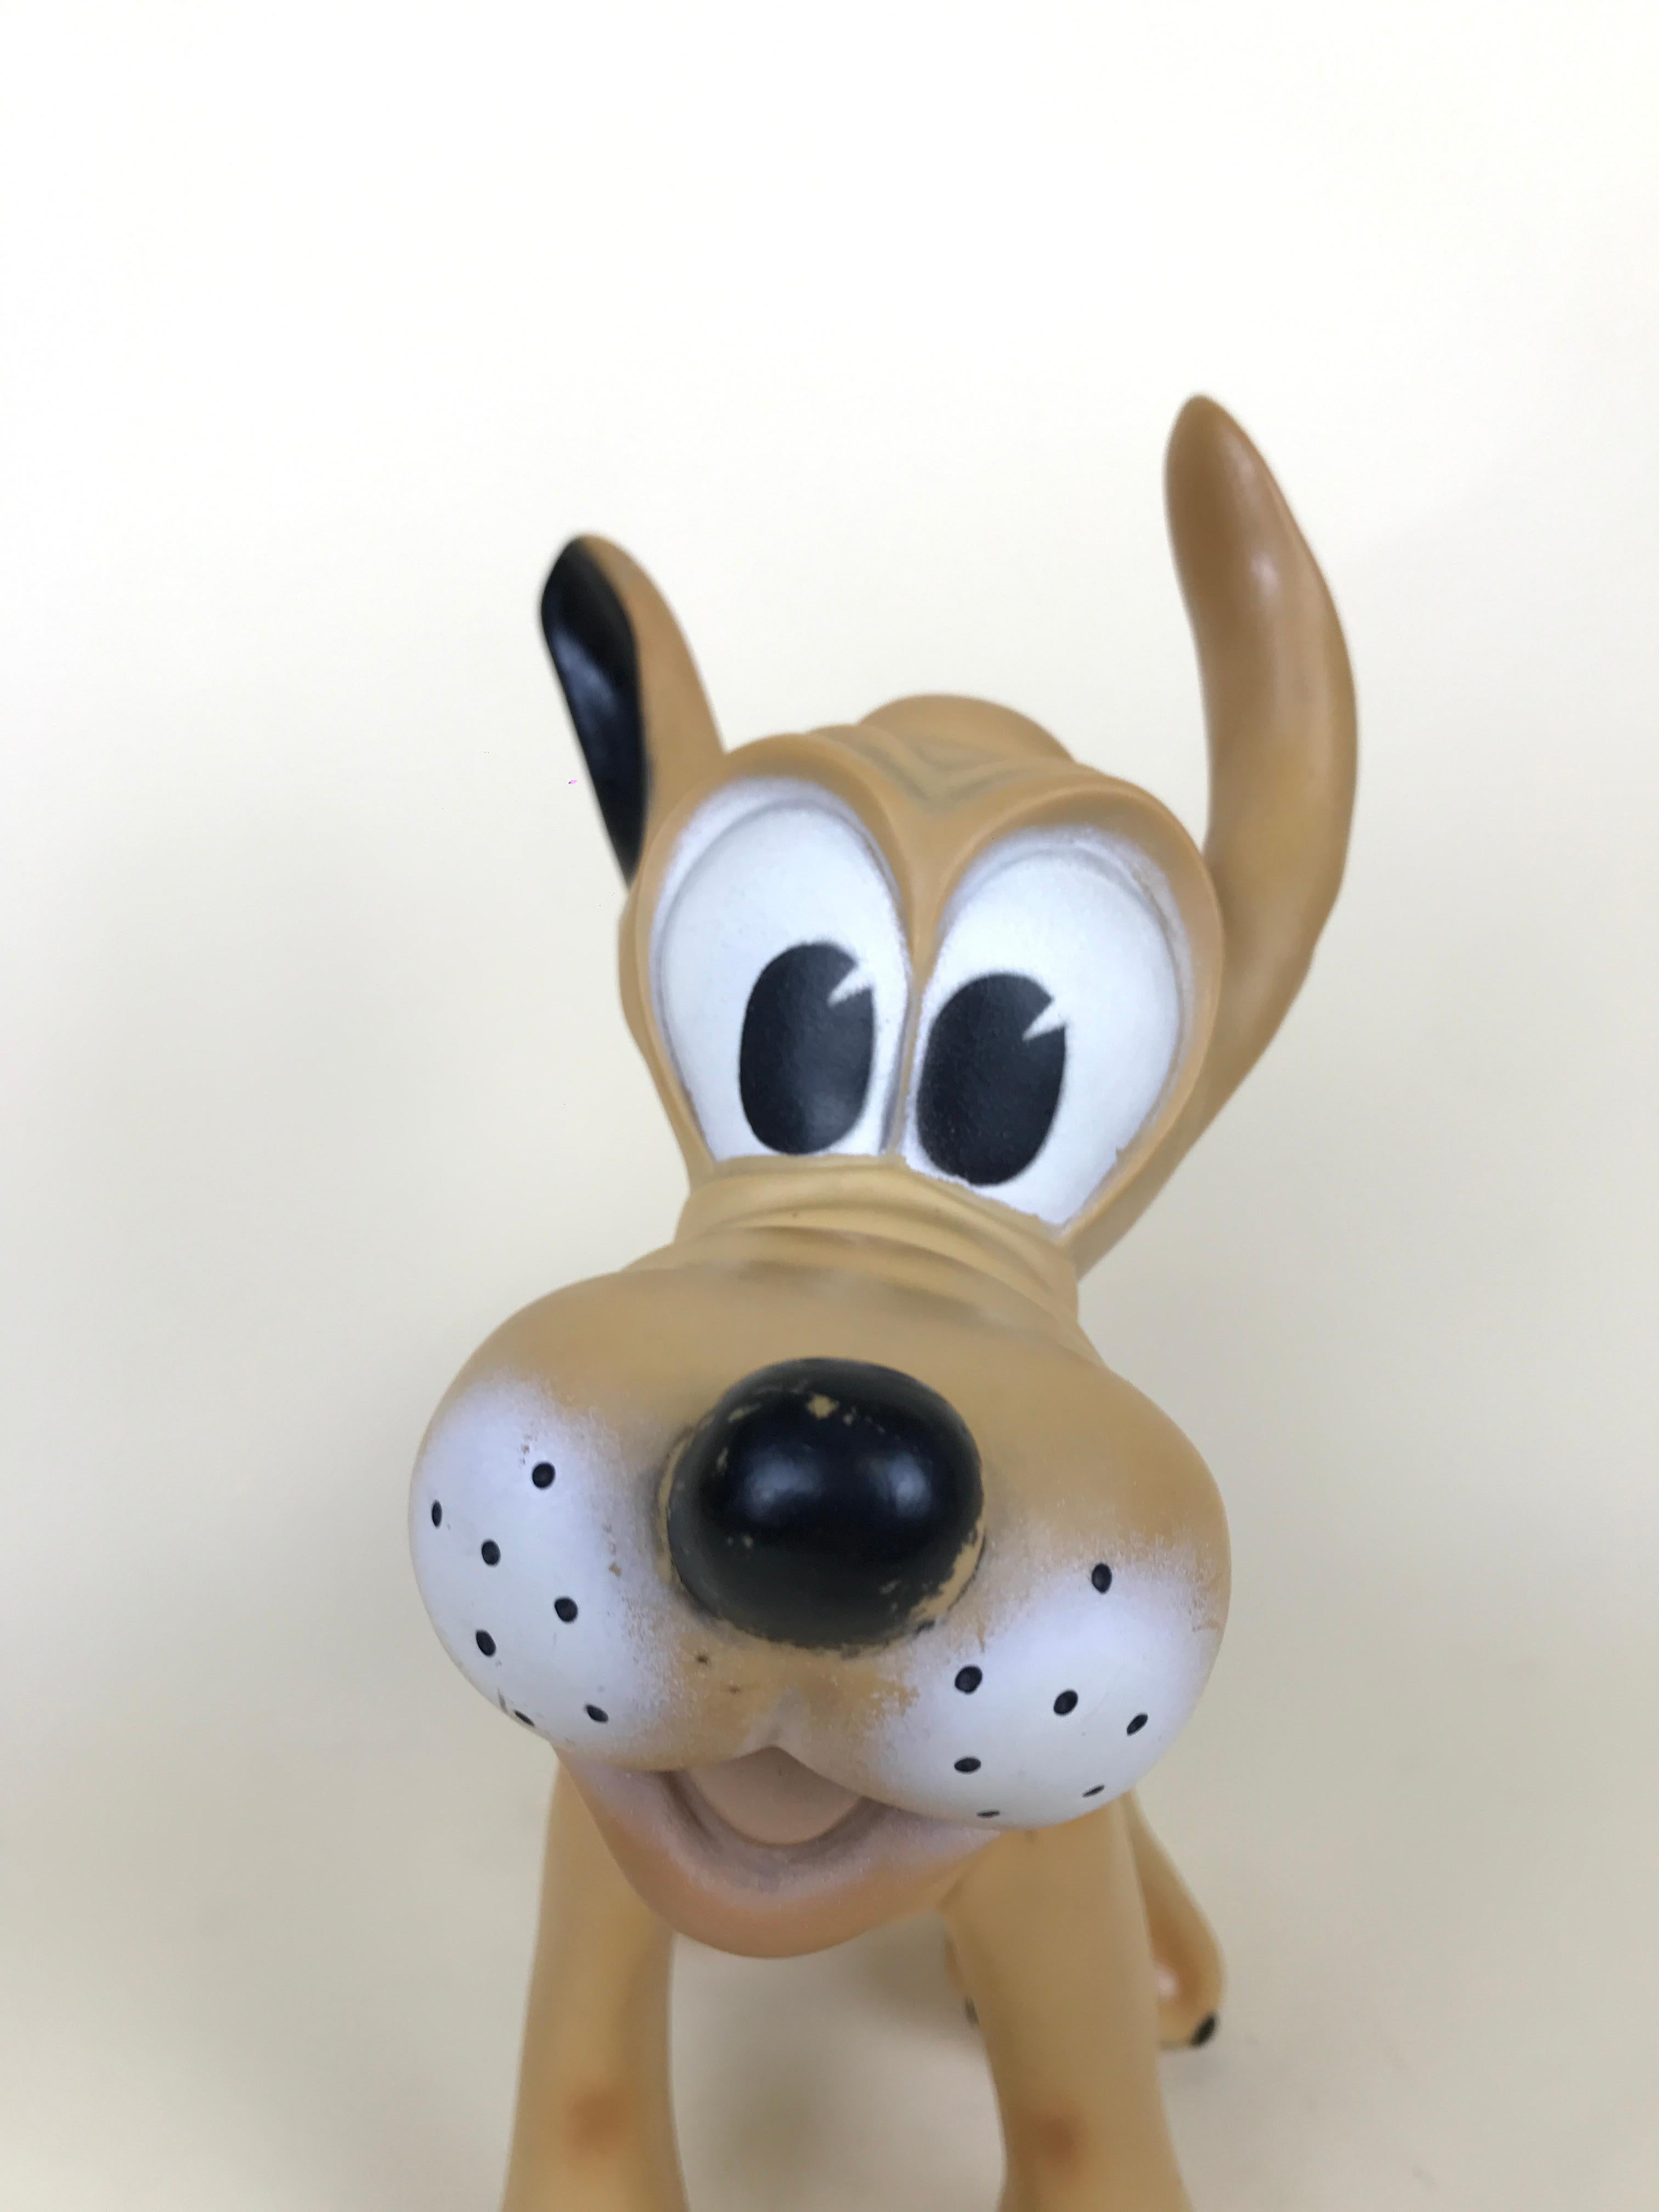 Mid-20th Century 1960s Vintage Original Disney Pluto Rubber Squeak Toy Made in Italy For Sale